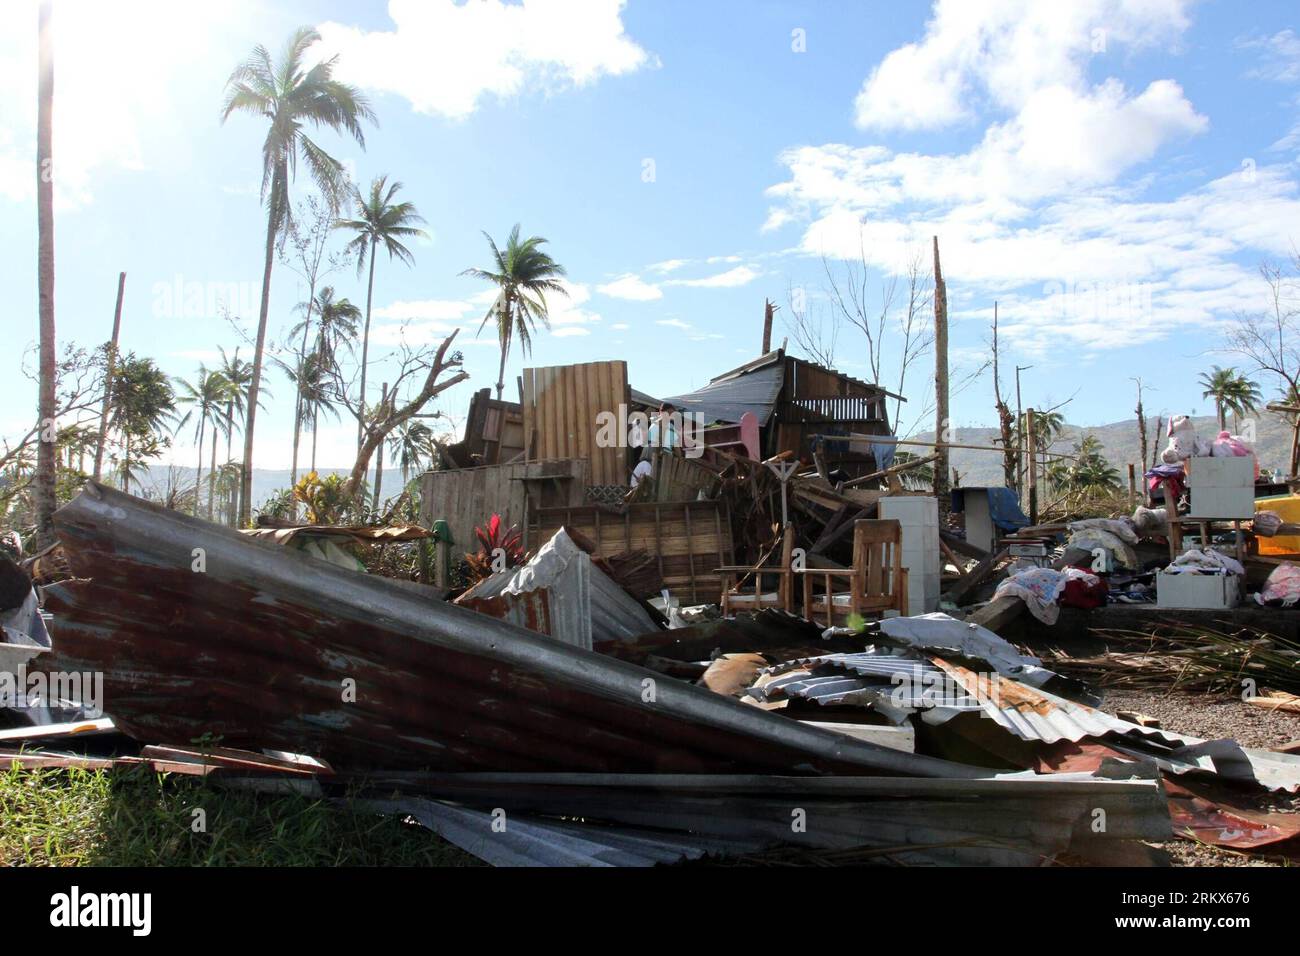 Bildnummer: 58897297  Datum: 08.12.2012  Copyright: imago/Xinhua (121208) -- DAVAO ORIENTAL, Dec. 8, 2012 (Xinhua) -- Picture taken on Dec. 8, 2012 shows a destroyed house in Davao Oriental province, the Philippines. Philippine President Benigno S. Aquino III has declared a state of national calamity following the devastation brought by Typhoon Bopha (local name Pablo) in Southern Philippines, a senior government official said Saturday. The latest data released on Saturday by the National Disaster Risk Reduction and Management Council (NDRRMC) showed that death toll hit 456, while 533 were sti Stock Photo